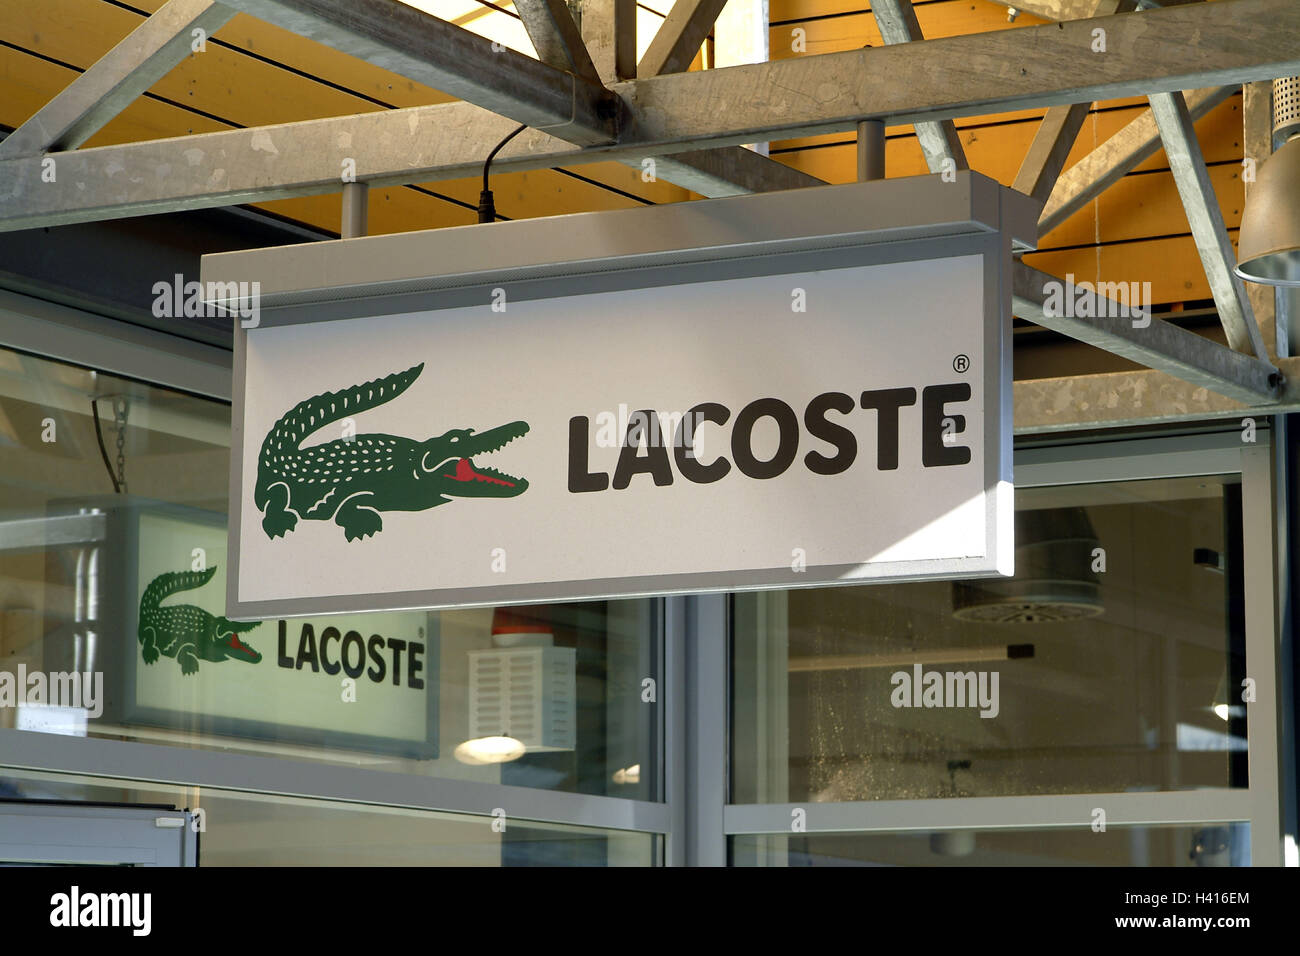 Business, passage, company plaque, Lacoste only editorially economy, retail trade, boutique, sign, fashion, Fashion, trade name, trade name, company, company name, sign, logo, company logo, designer fashion, fashion mark, fashion ...